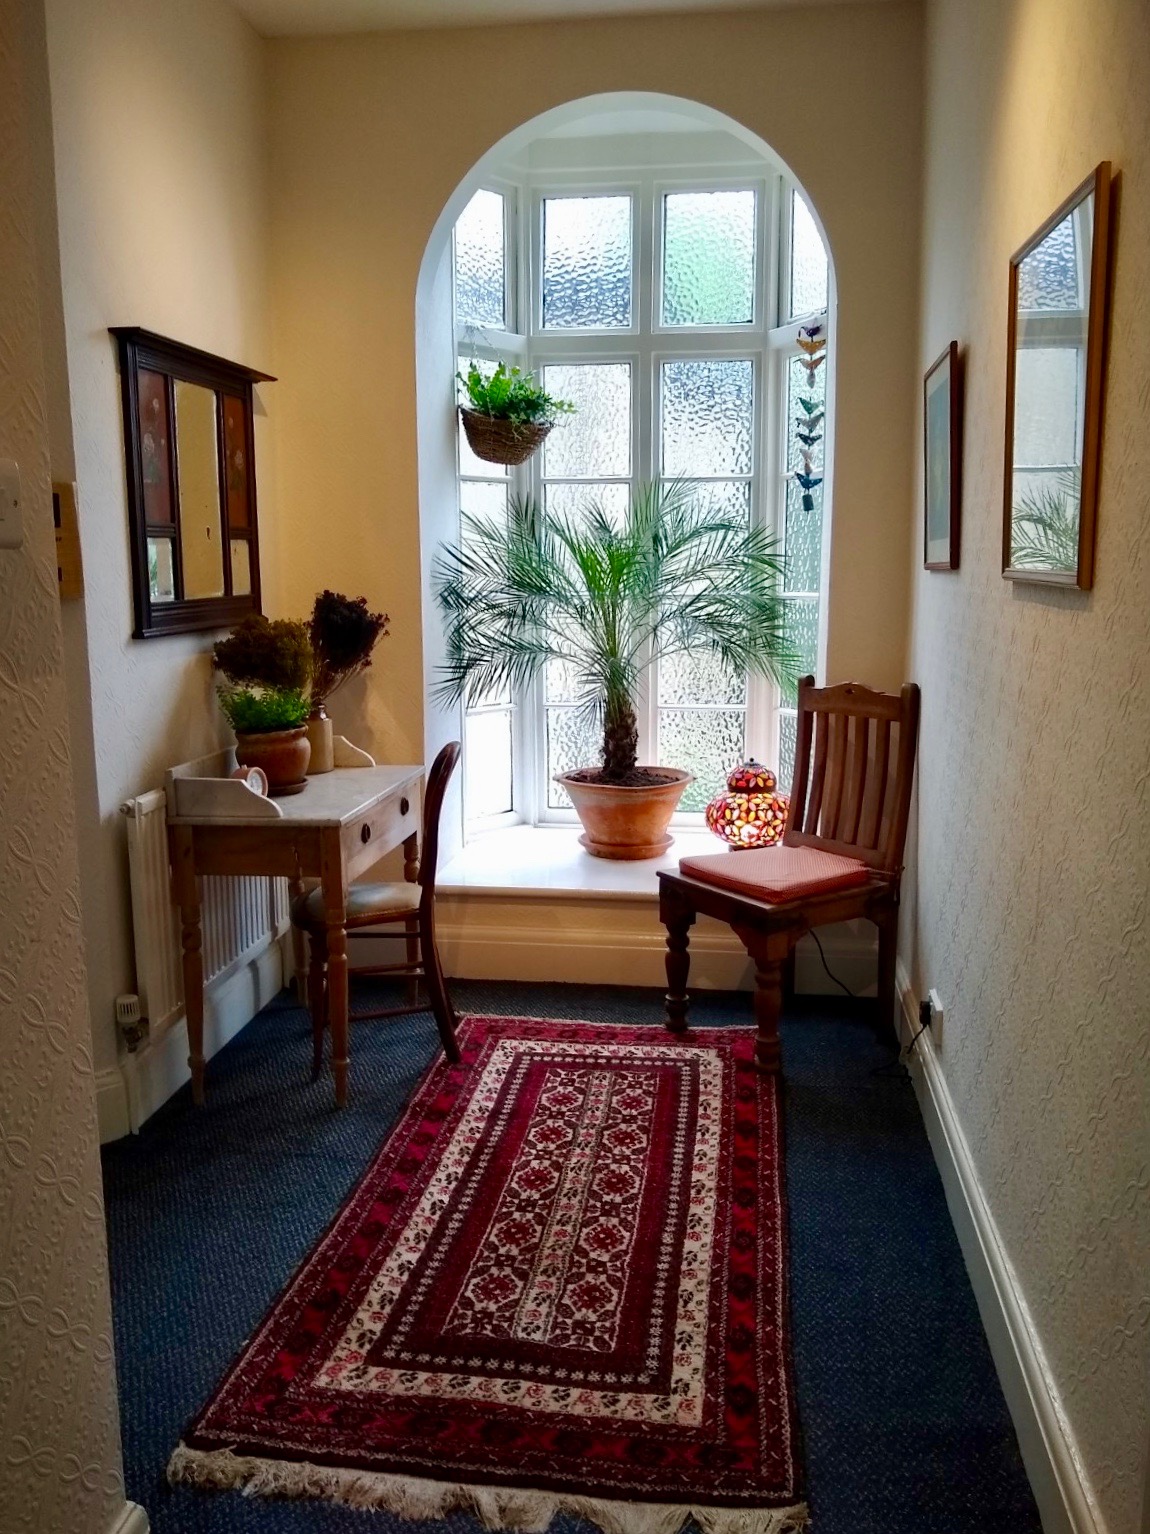 Arched window in the hallway with desk, chairs and a large plant